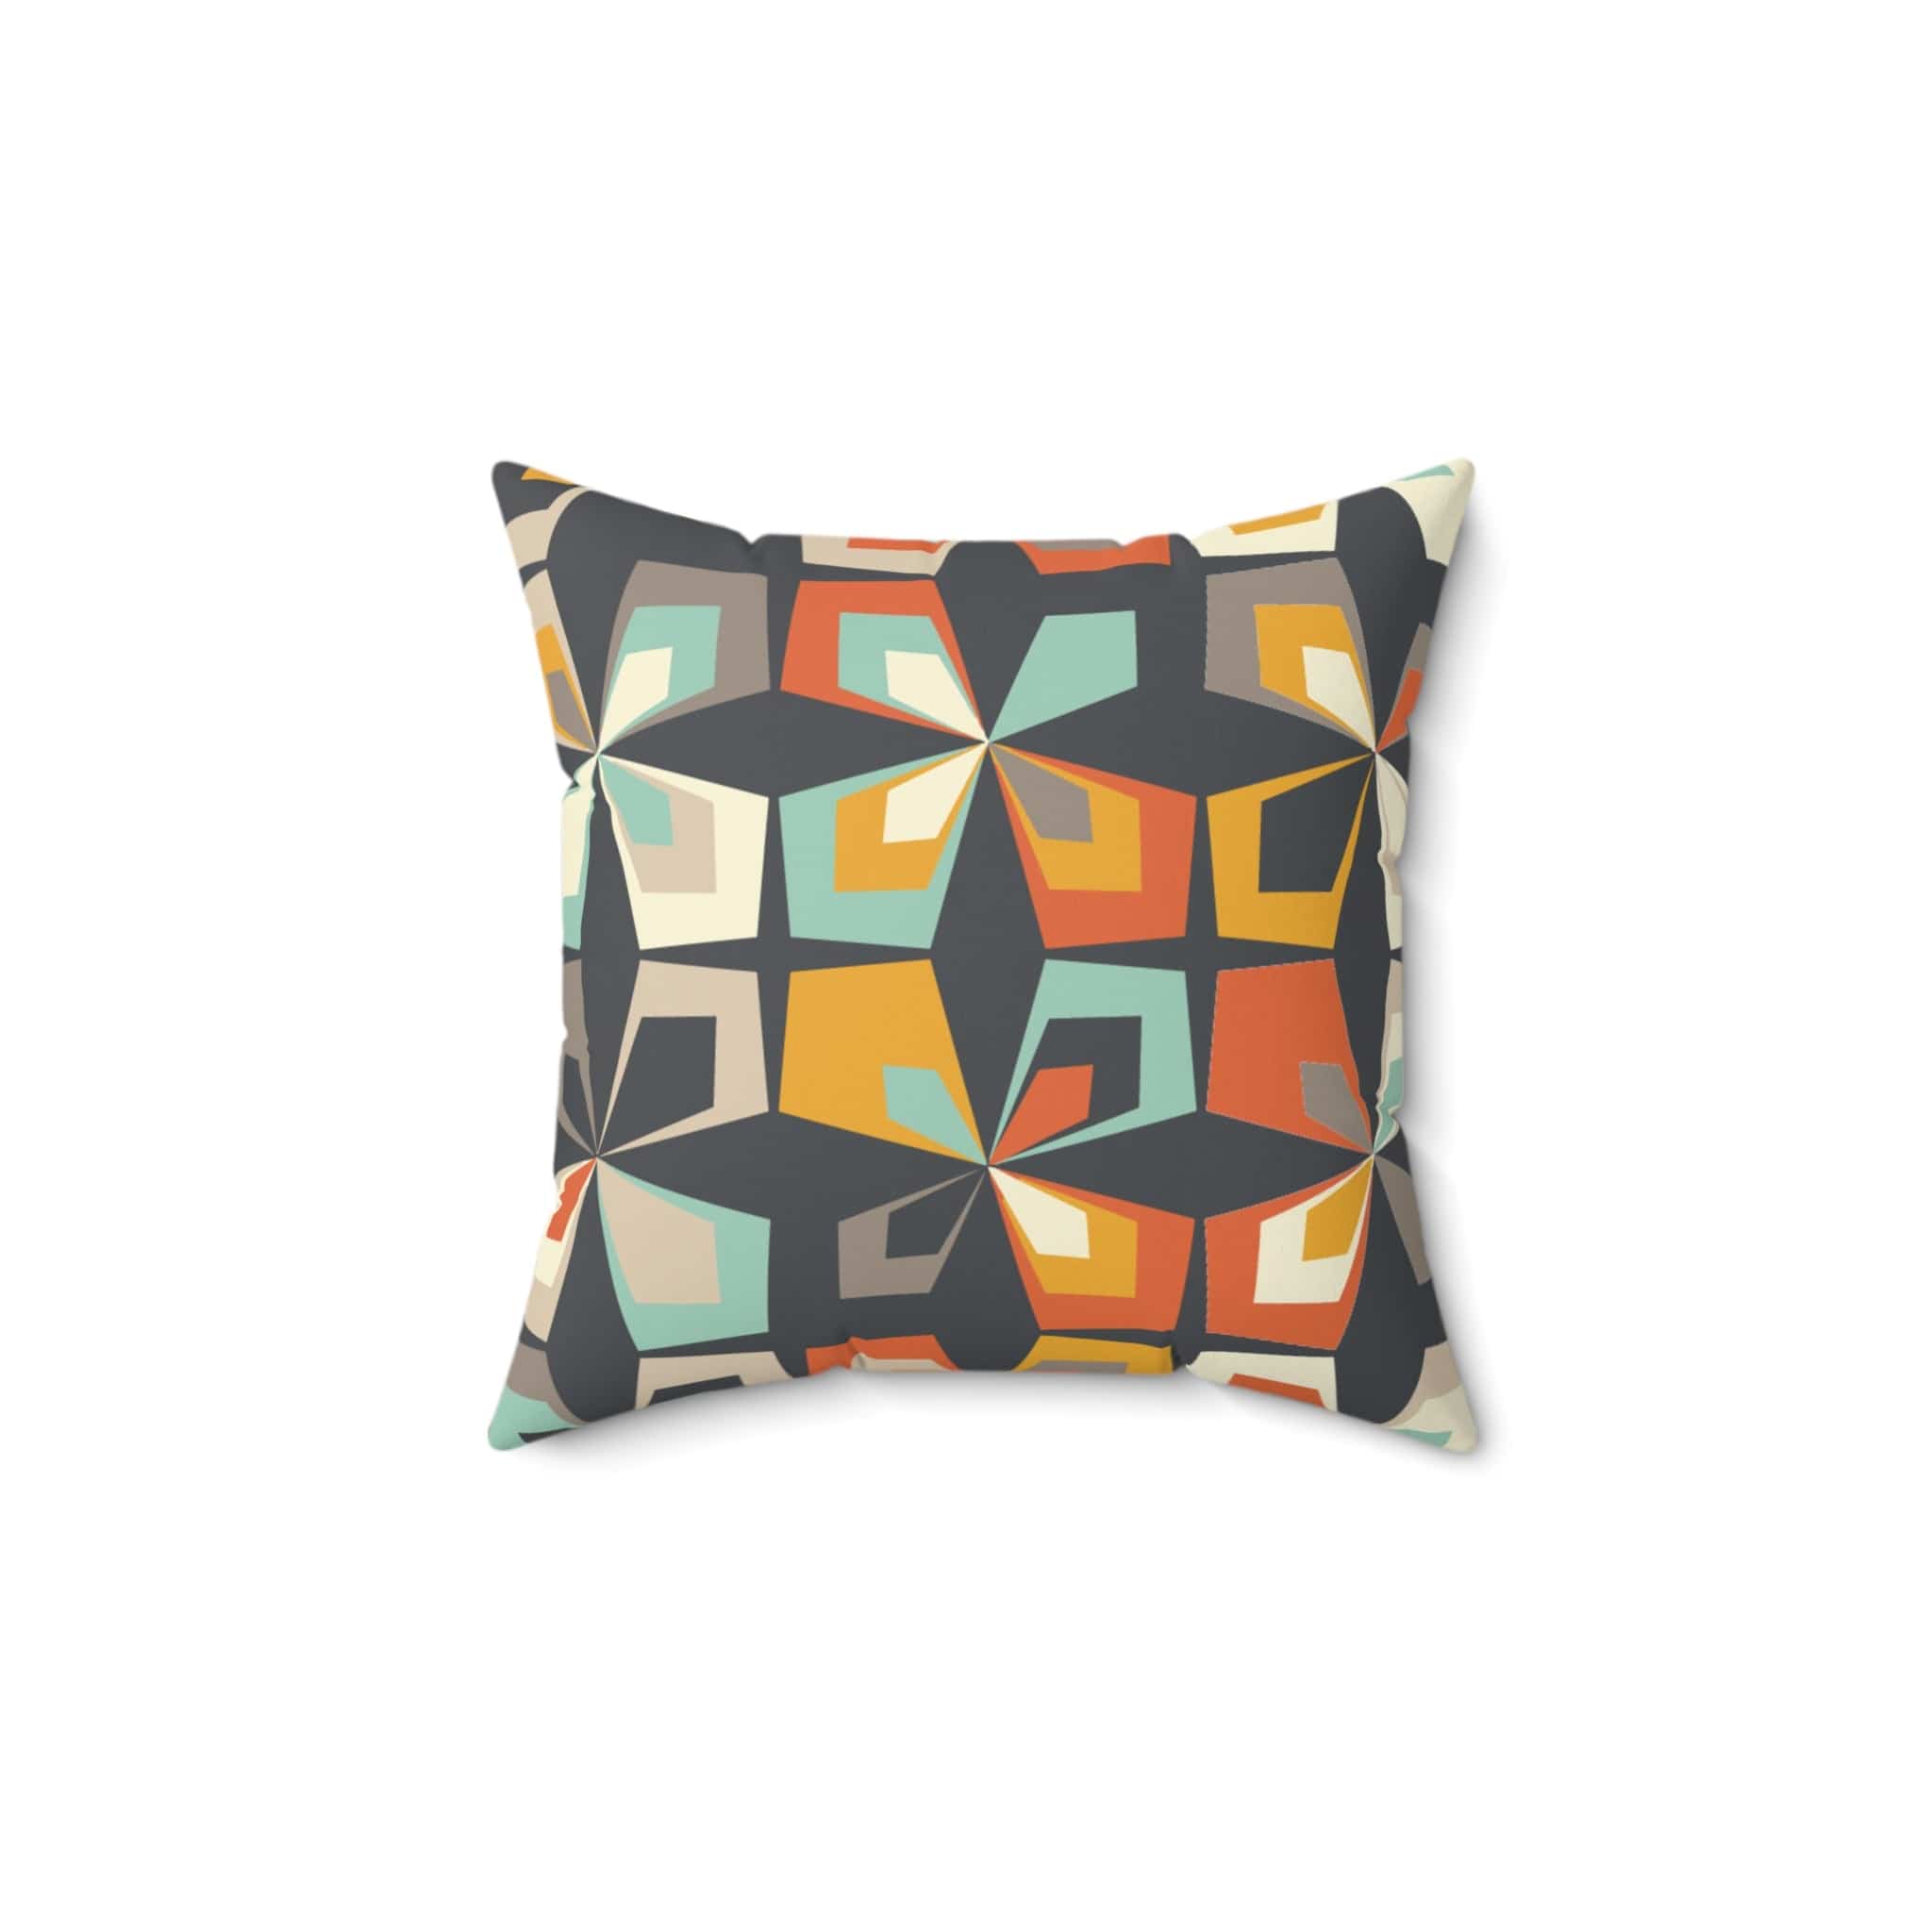 Kate McEnroe New York Mid Century Modern Geometric Throw Pillow with Insert, Retro Vintage 60s Abstract Floral Living Room, Bedroom DecorThrow Pillows33432573668720474081